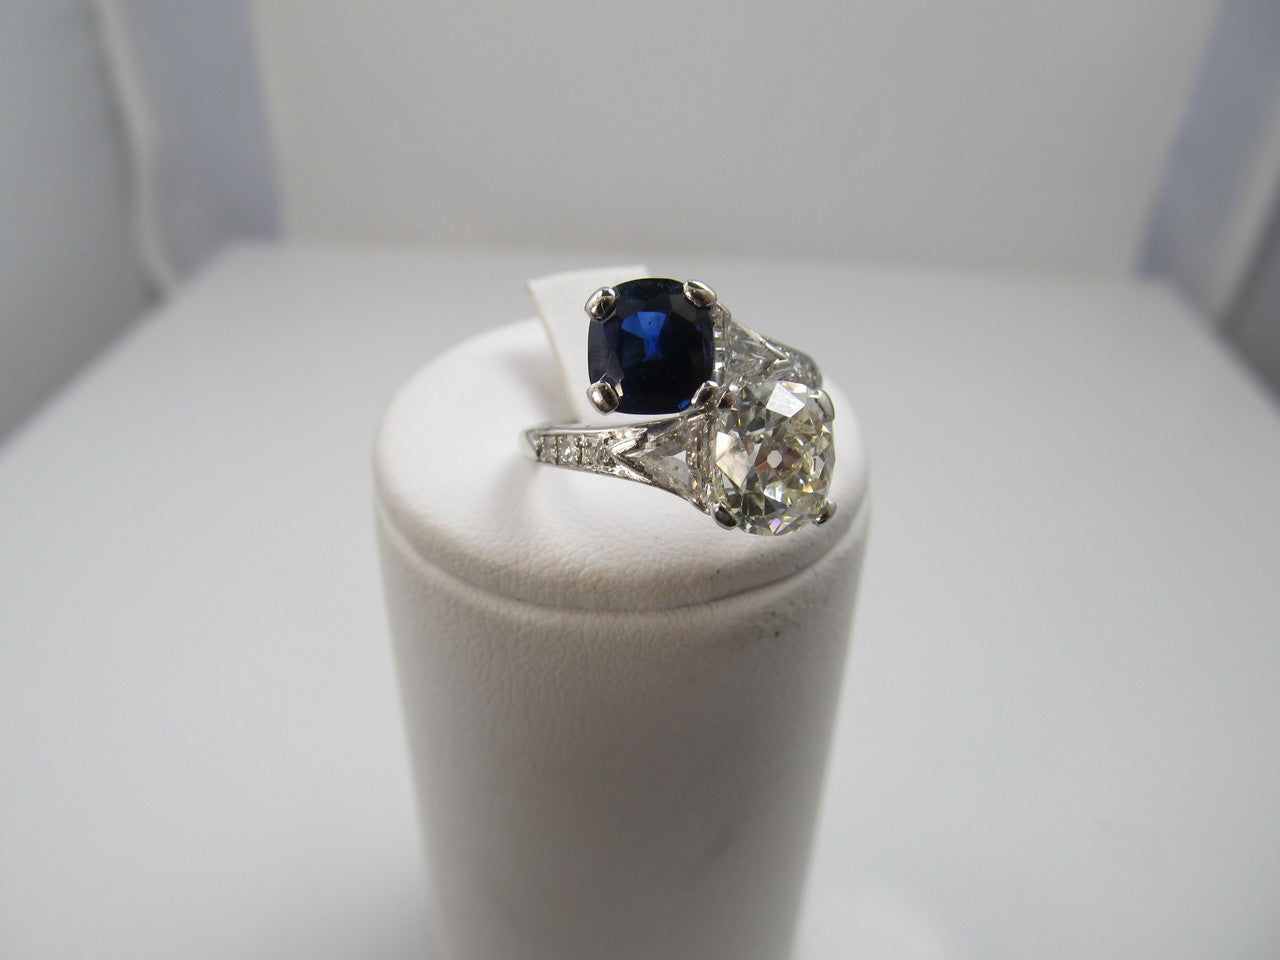 Platinum Ring With A 1.92ct Old Cut Diamond, 1.42ct Natural Sapphire, Circa 1920